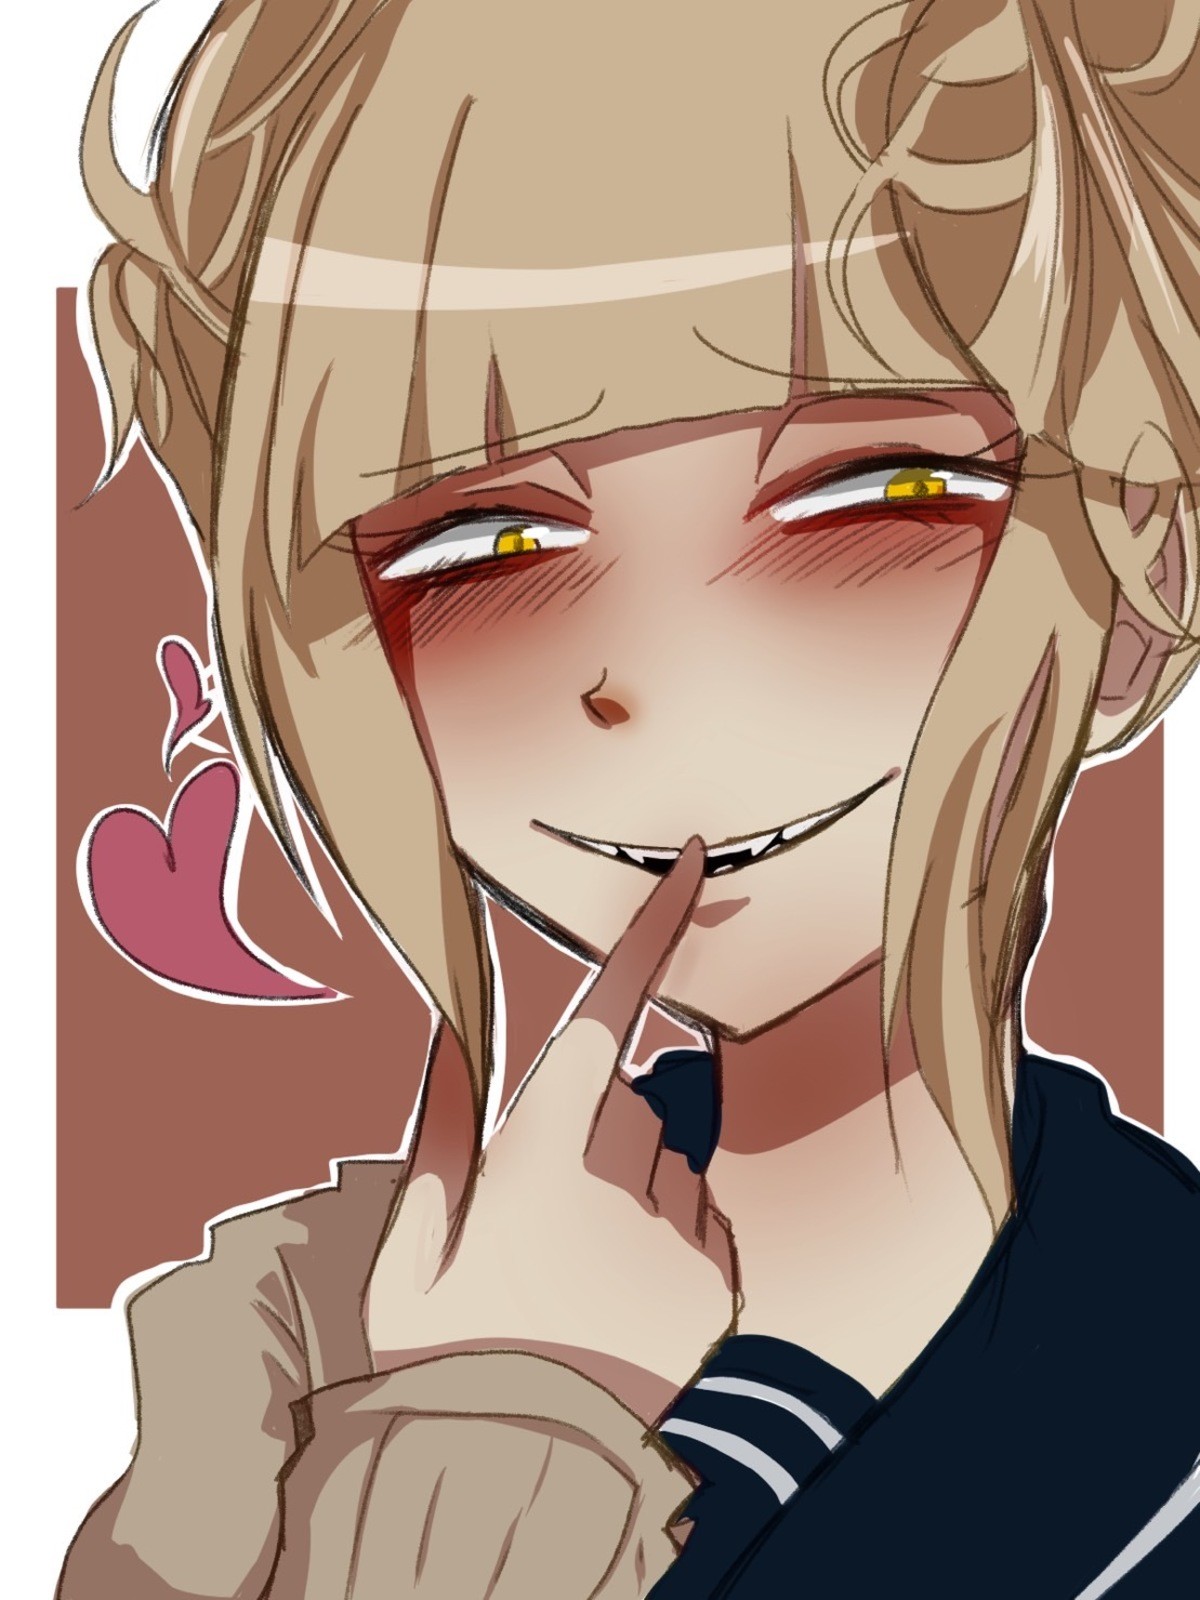 Daily Toga - 956: Weird Smile. join list: DailyToga (476 subs)Mention History Source: .. Nut.